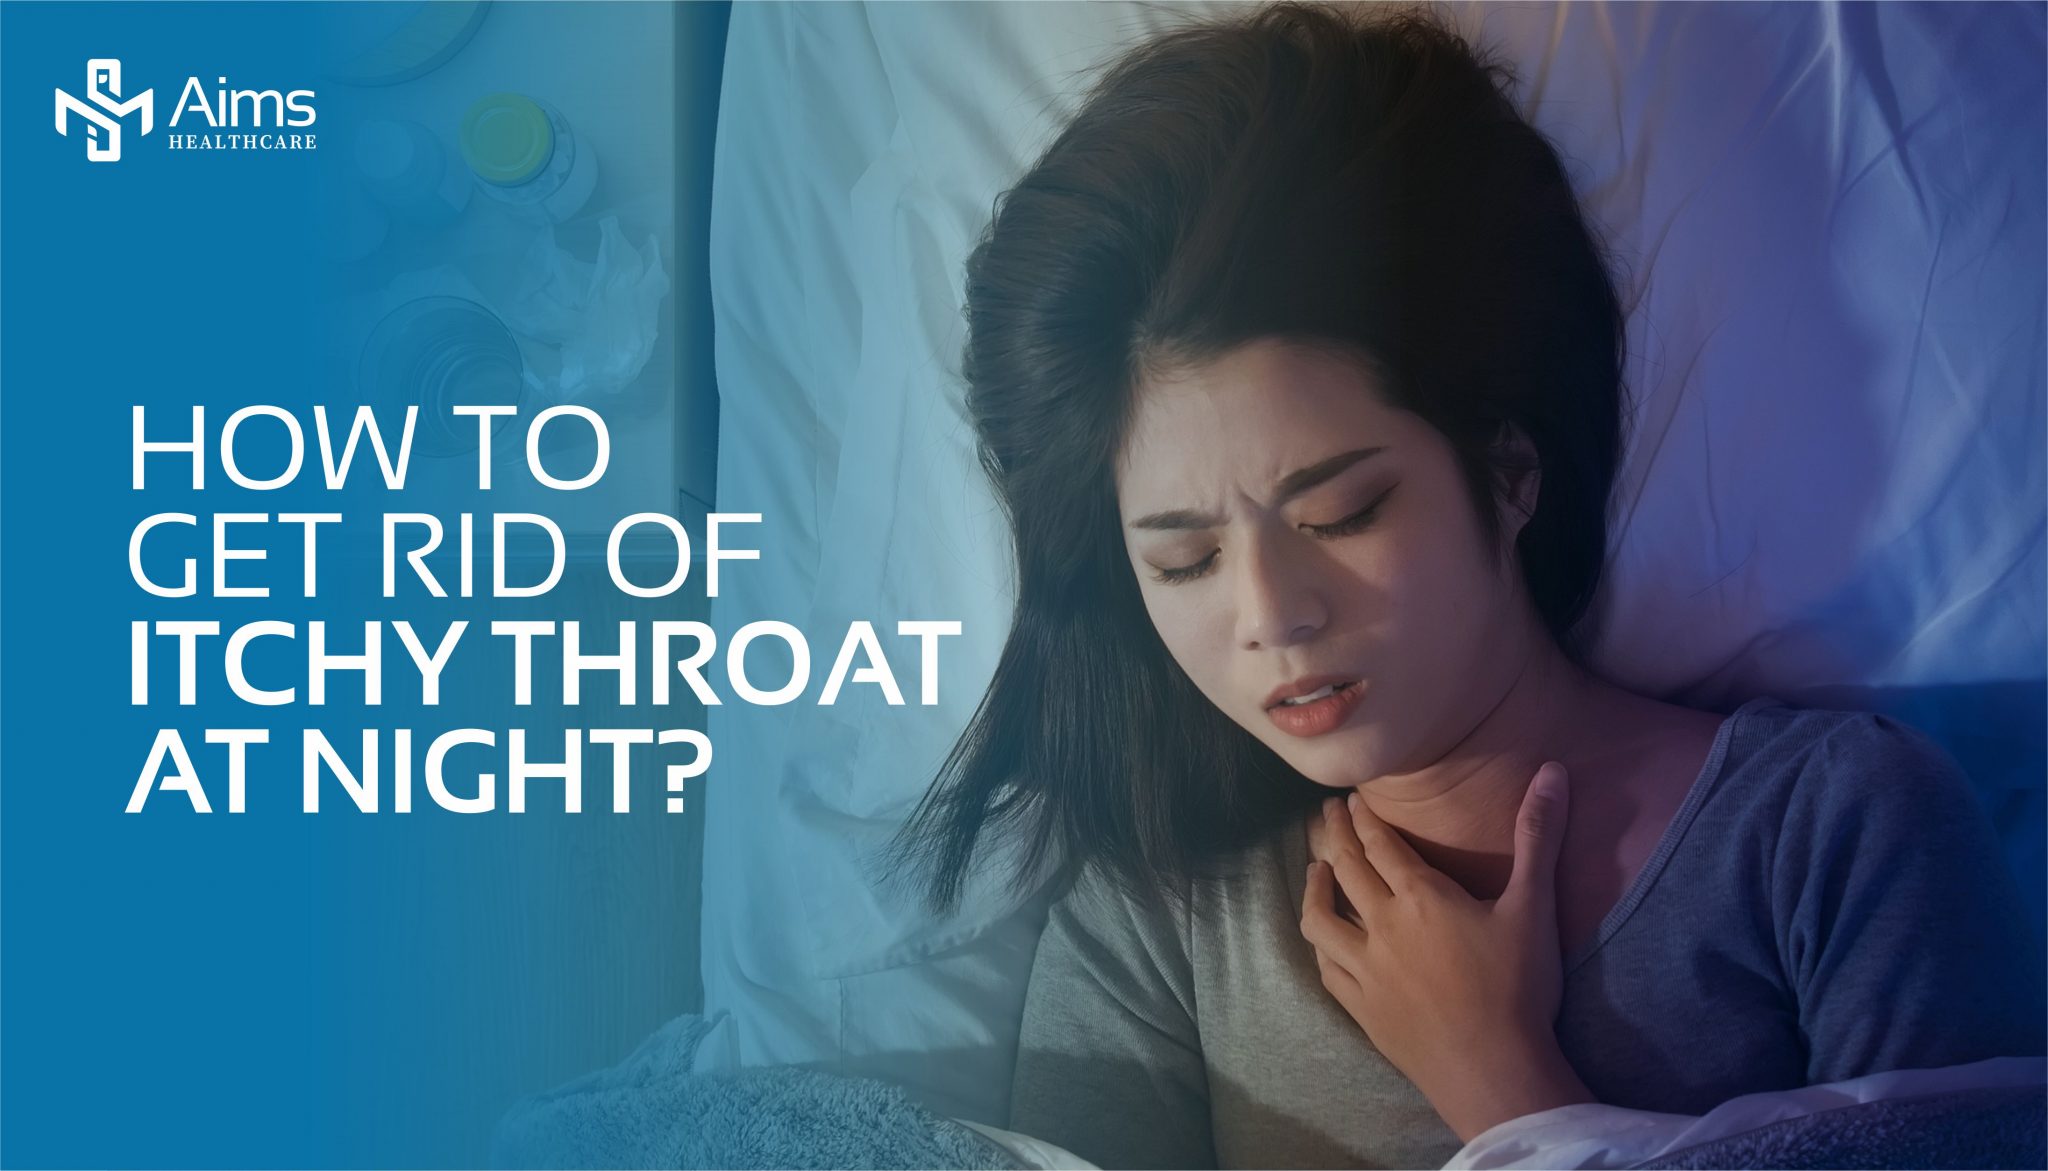 How To Get Rid Of Itchy Throat At Night - Aims Healthcare